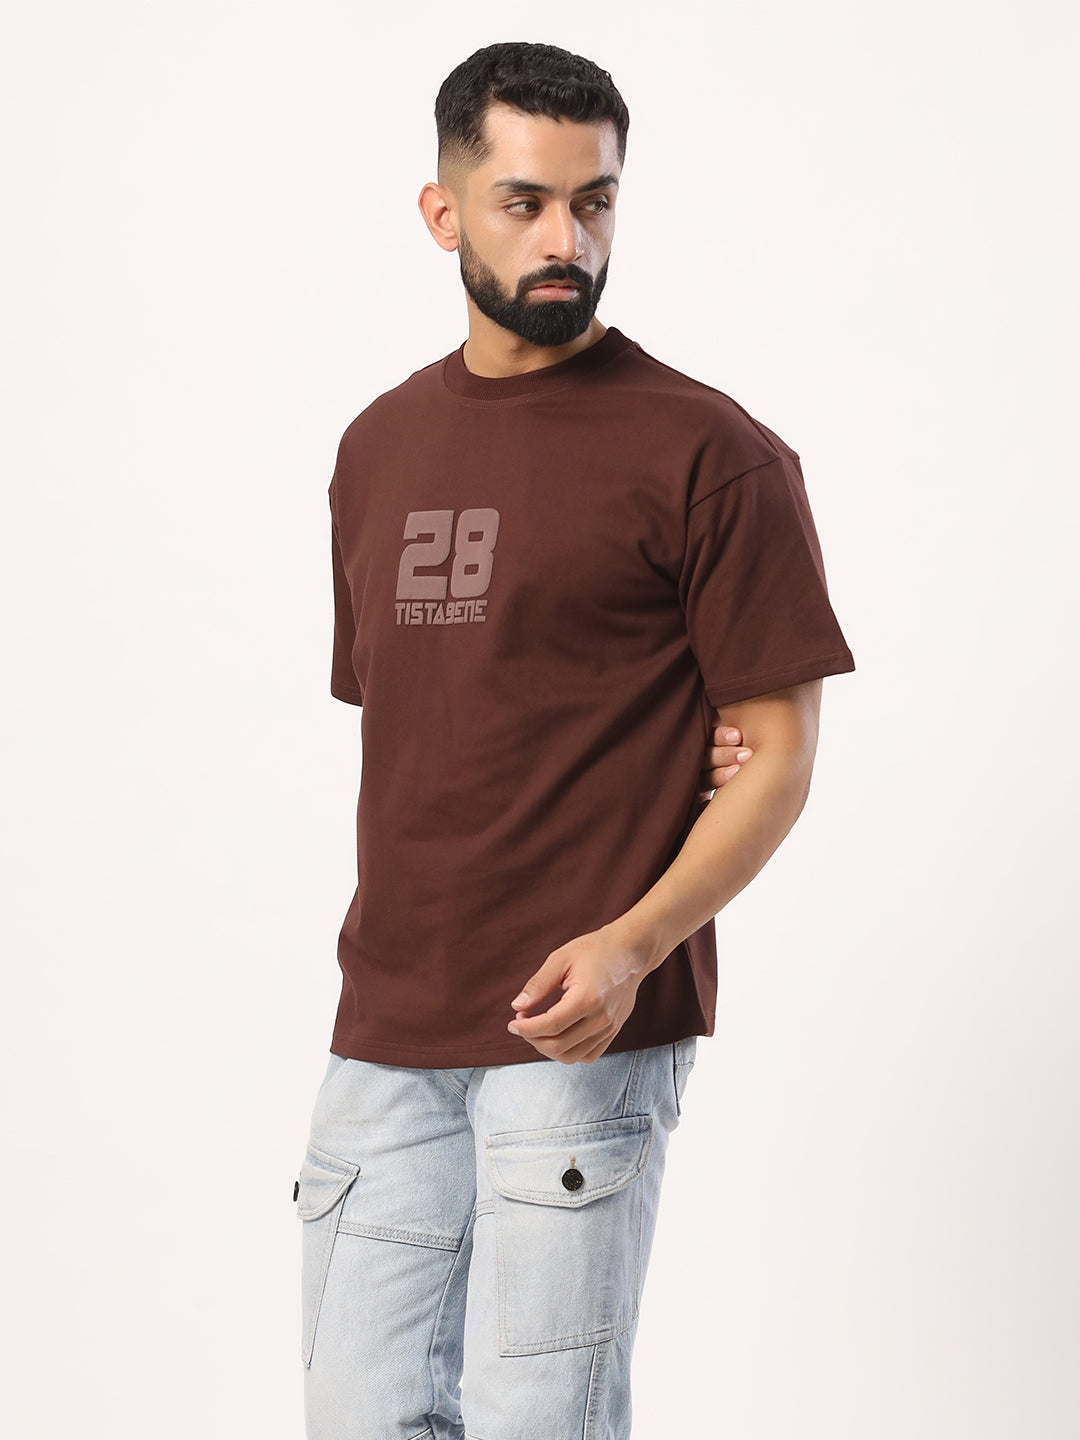 Brown 28 Tistabene French Terry Cotton Oversized Printed T-shirt